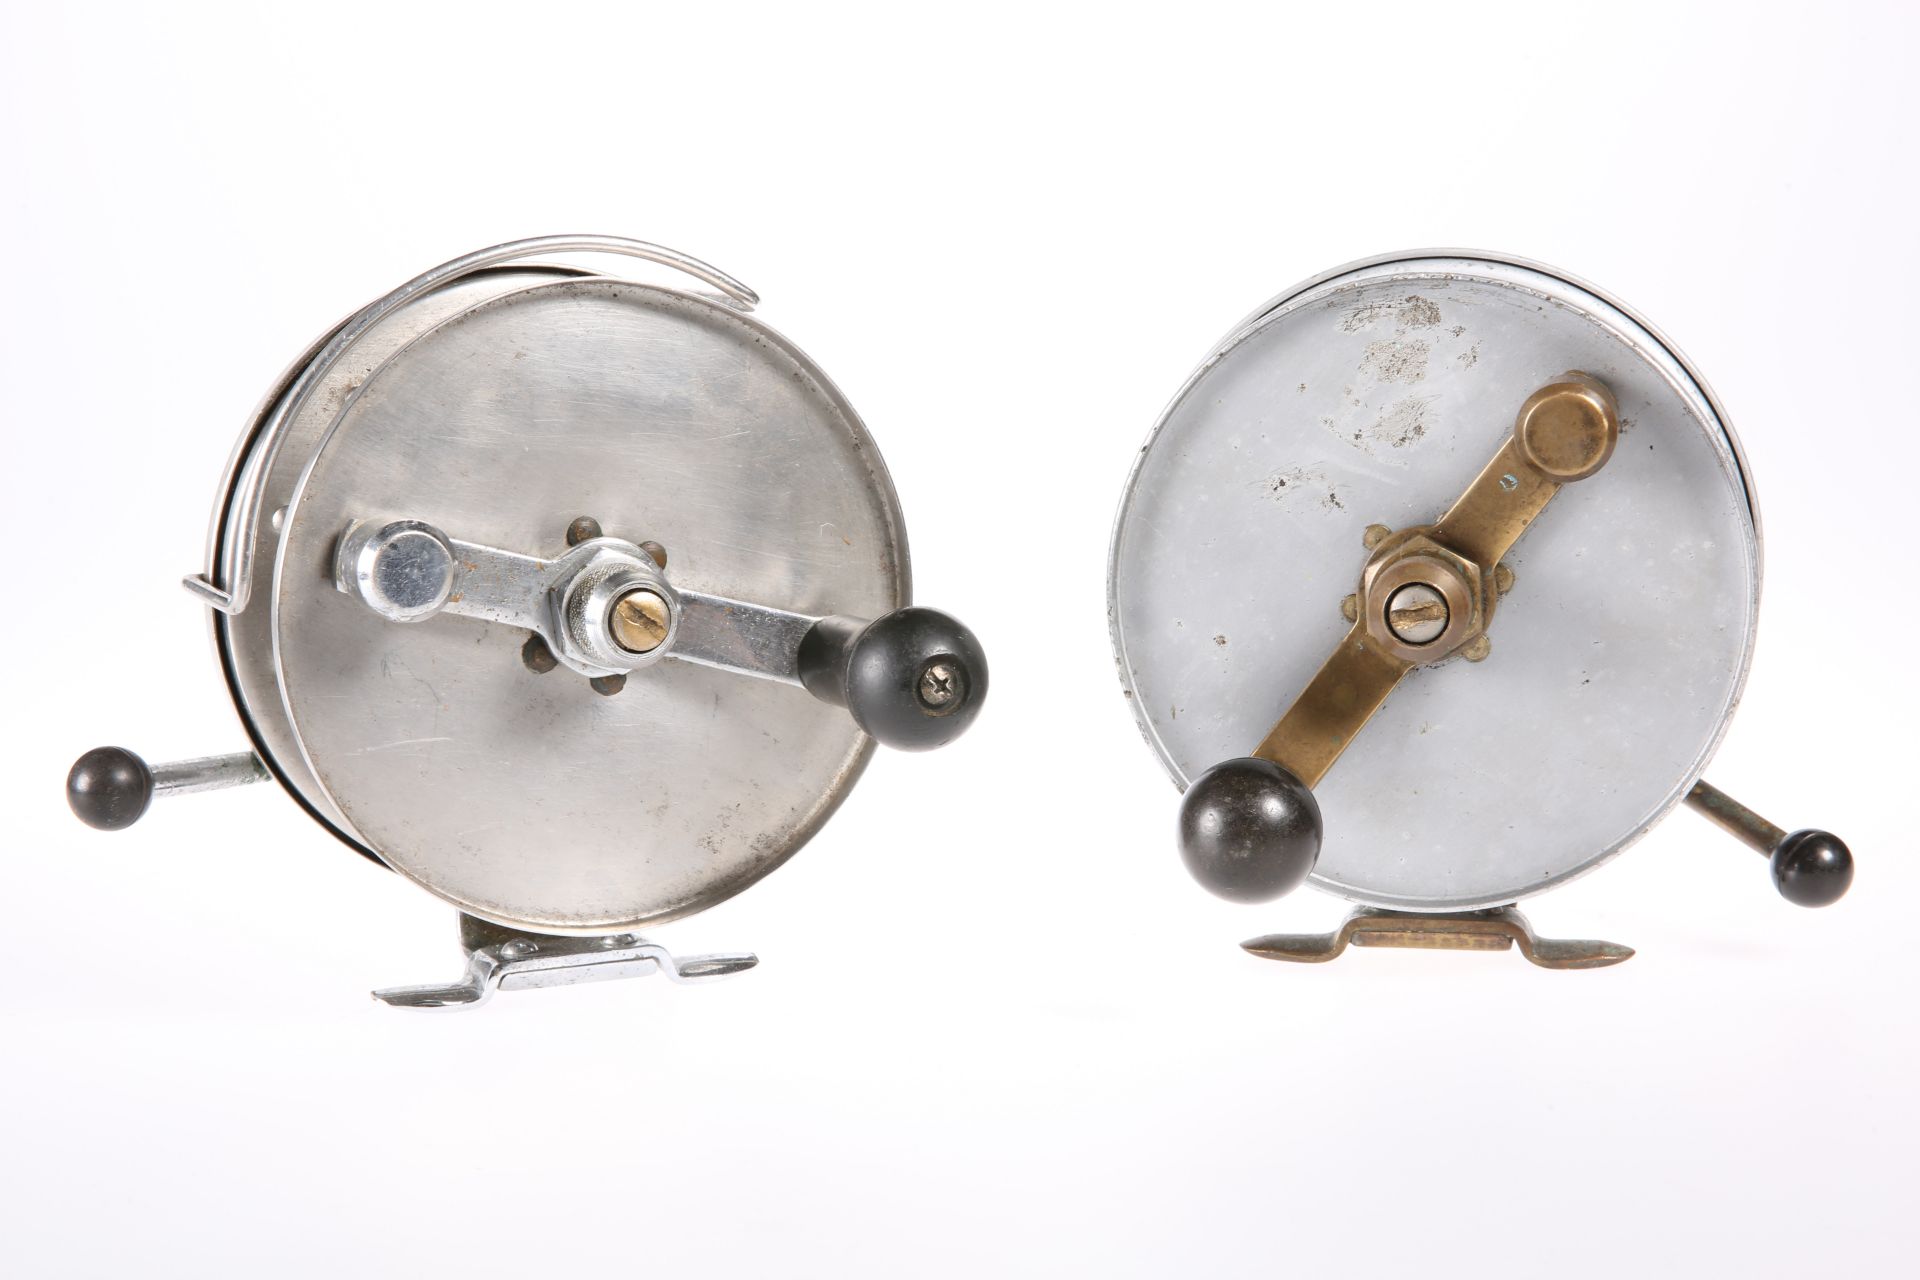 FISHING: A 6" BOAT OR GAME REEL BY S. ALLCOCK & CO. LTD., REDDITCH with white metal body; together